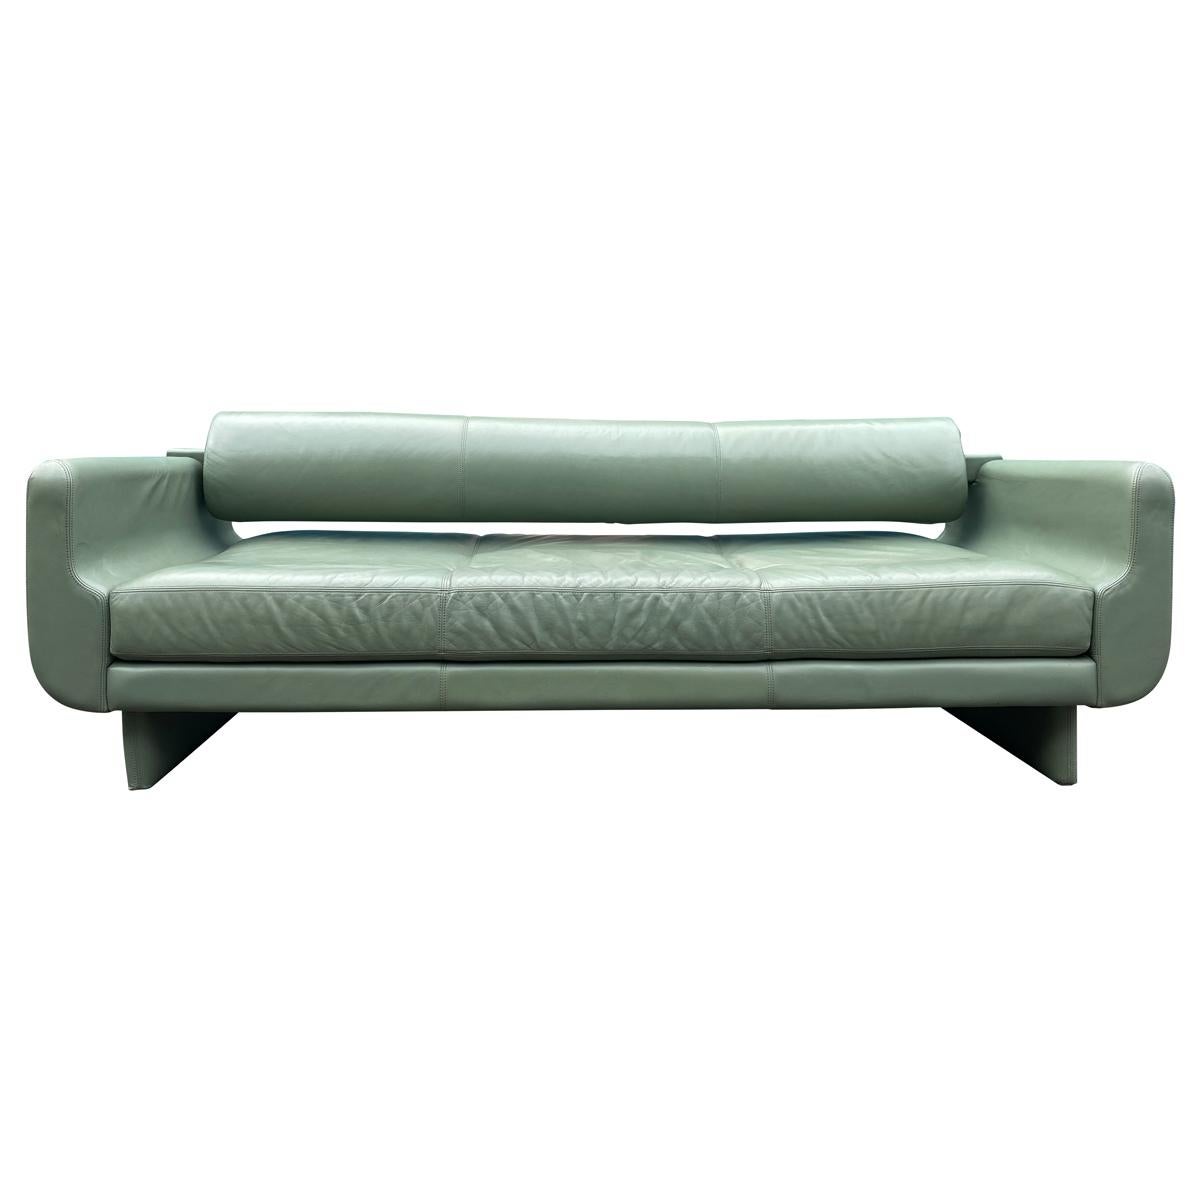 Beautiful Leather Matinee Daybed Sofa by Vladimir Kagan Sage Green Leather